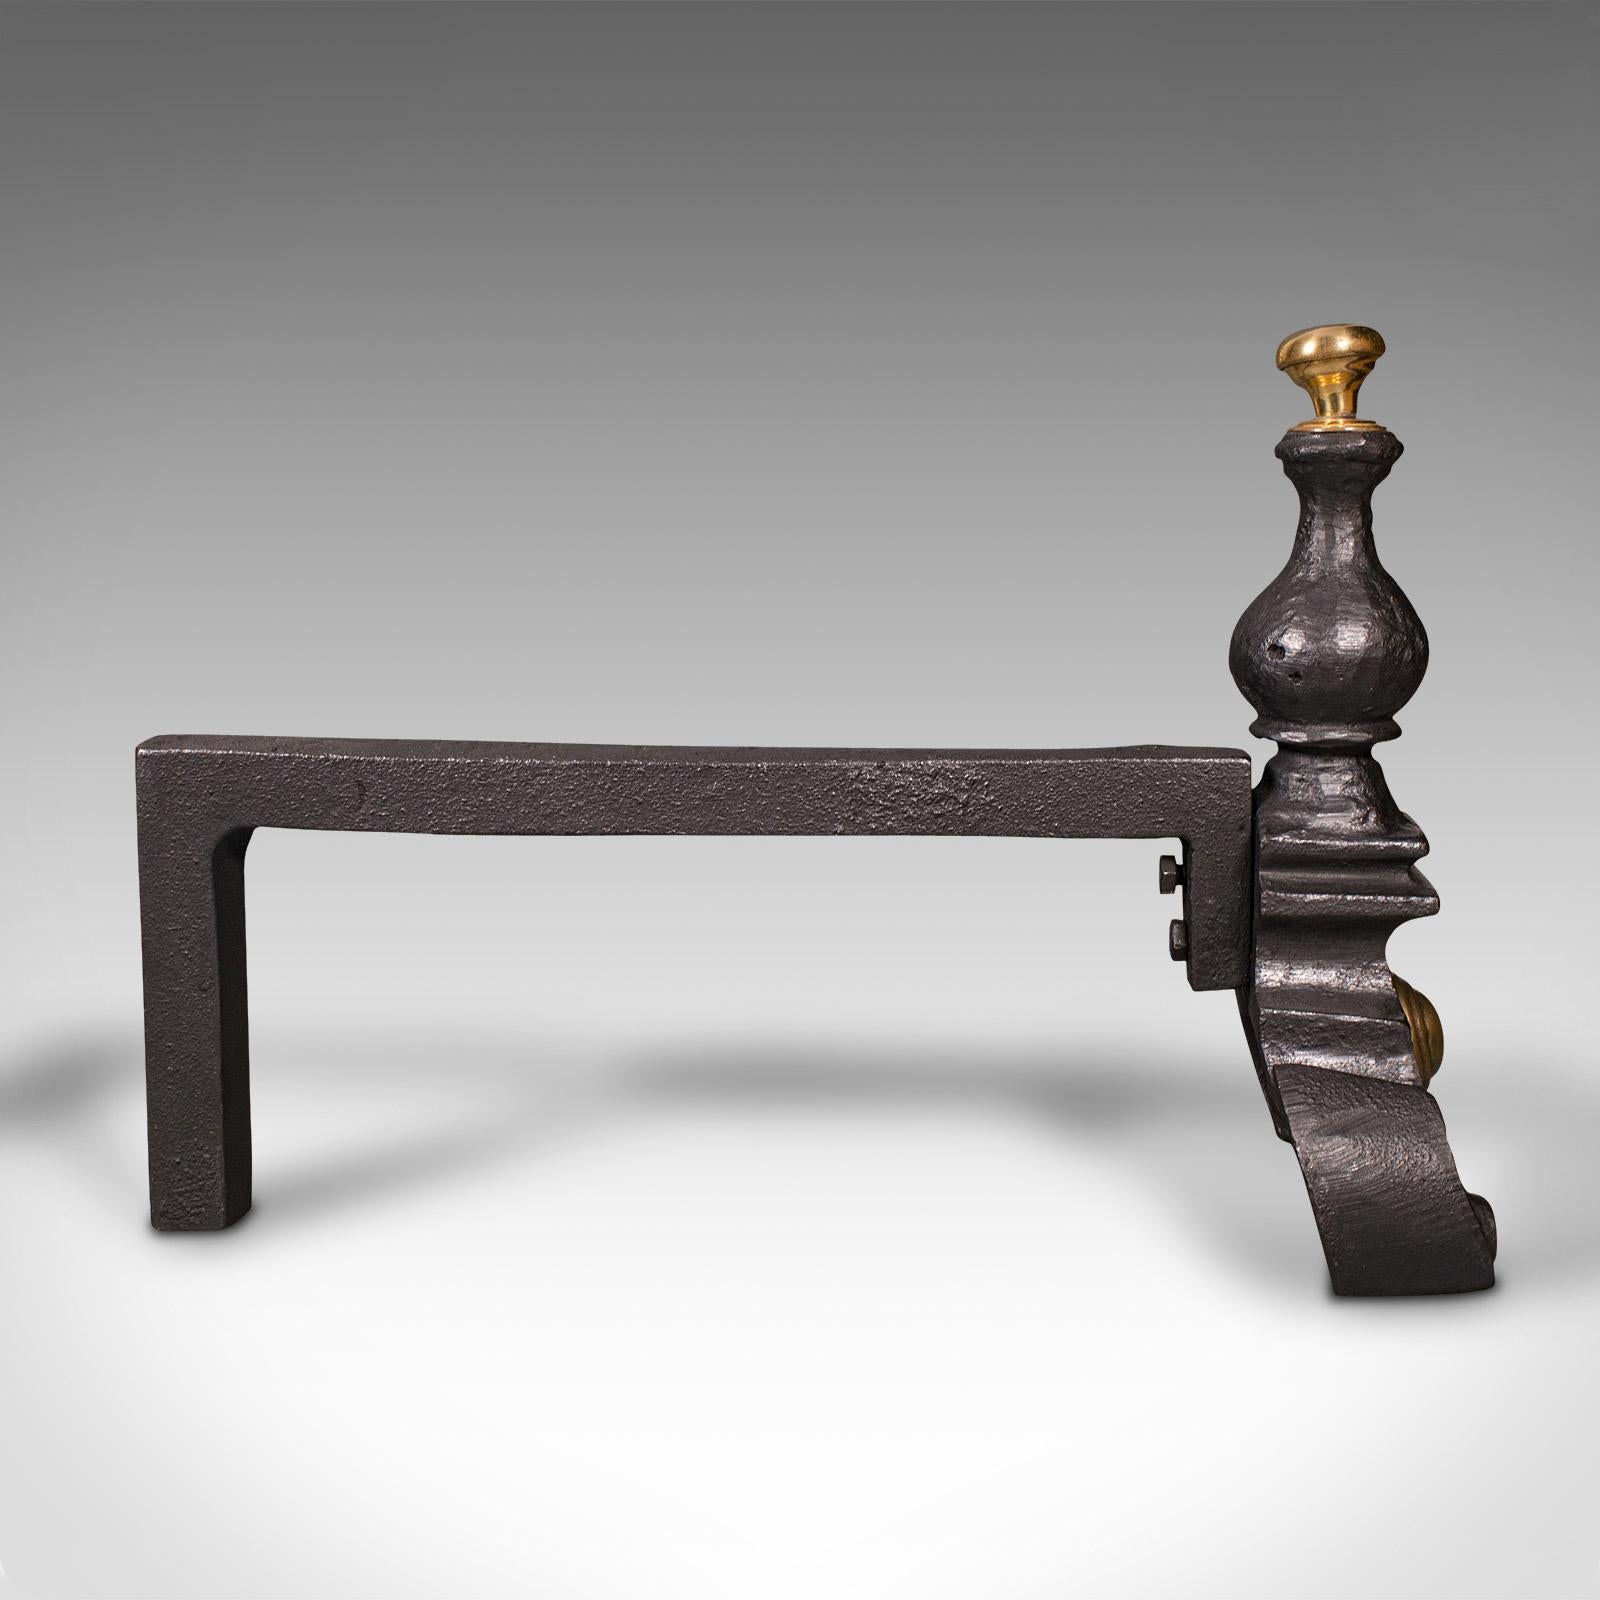 19th Century Pair Of Antique Decorative Fire Rests, English Fireside Andiron, Victorian, 1850 For Sale